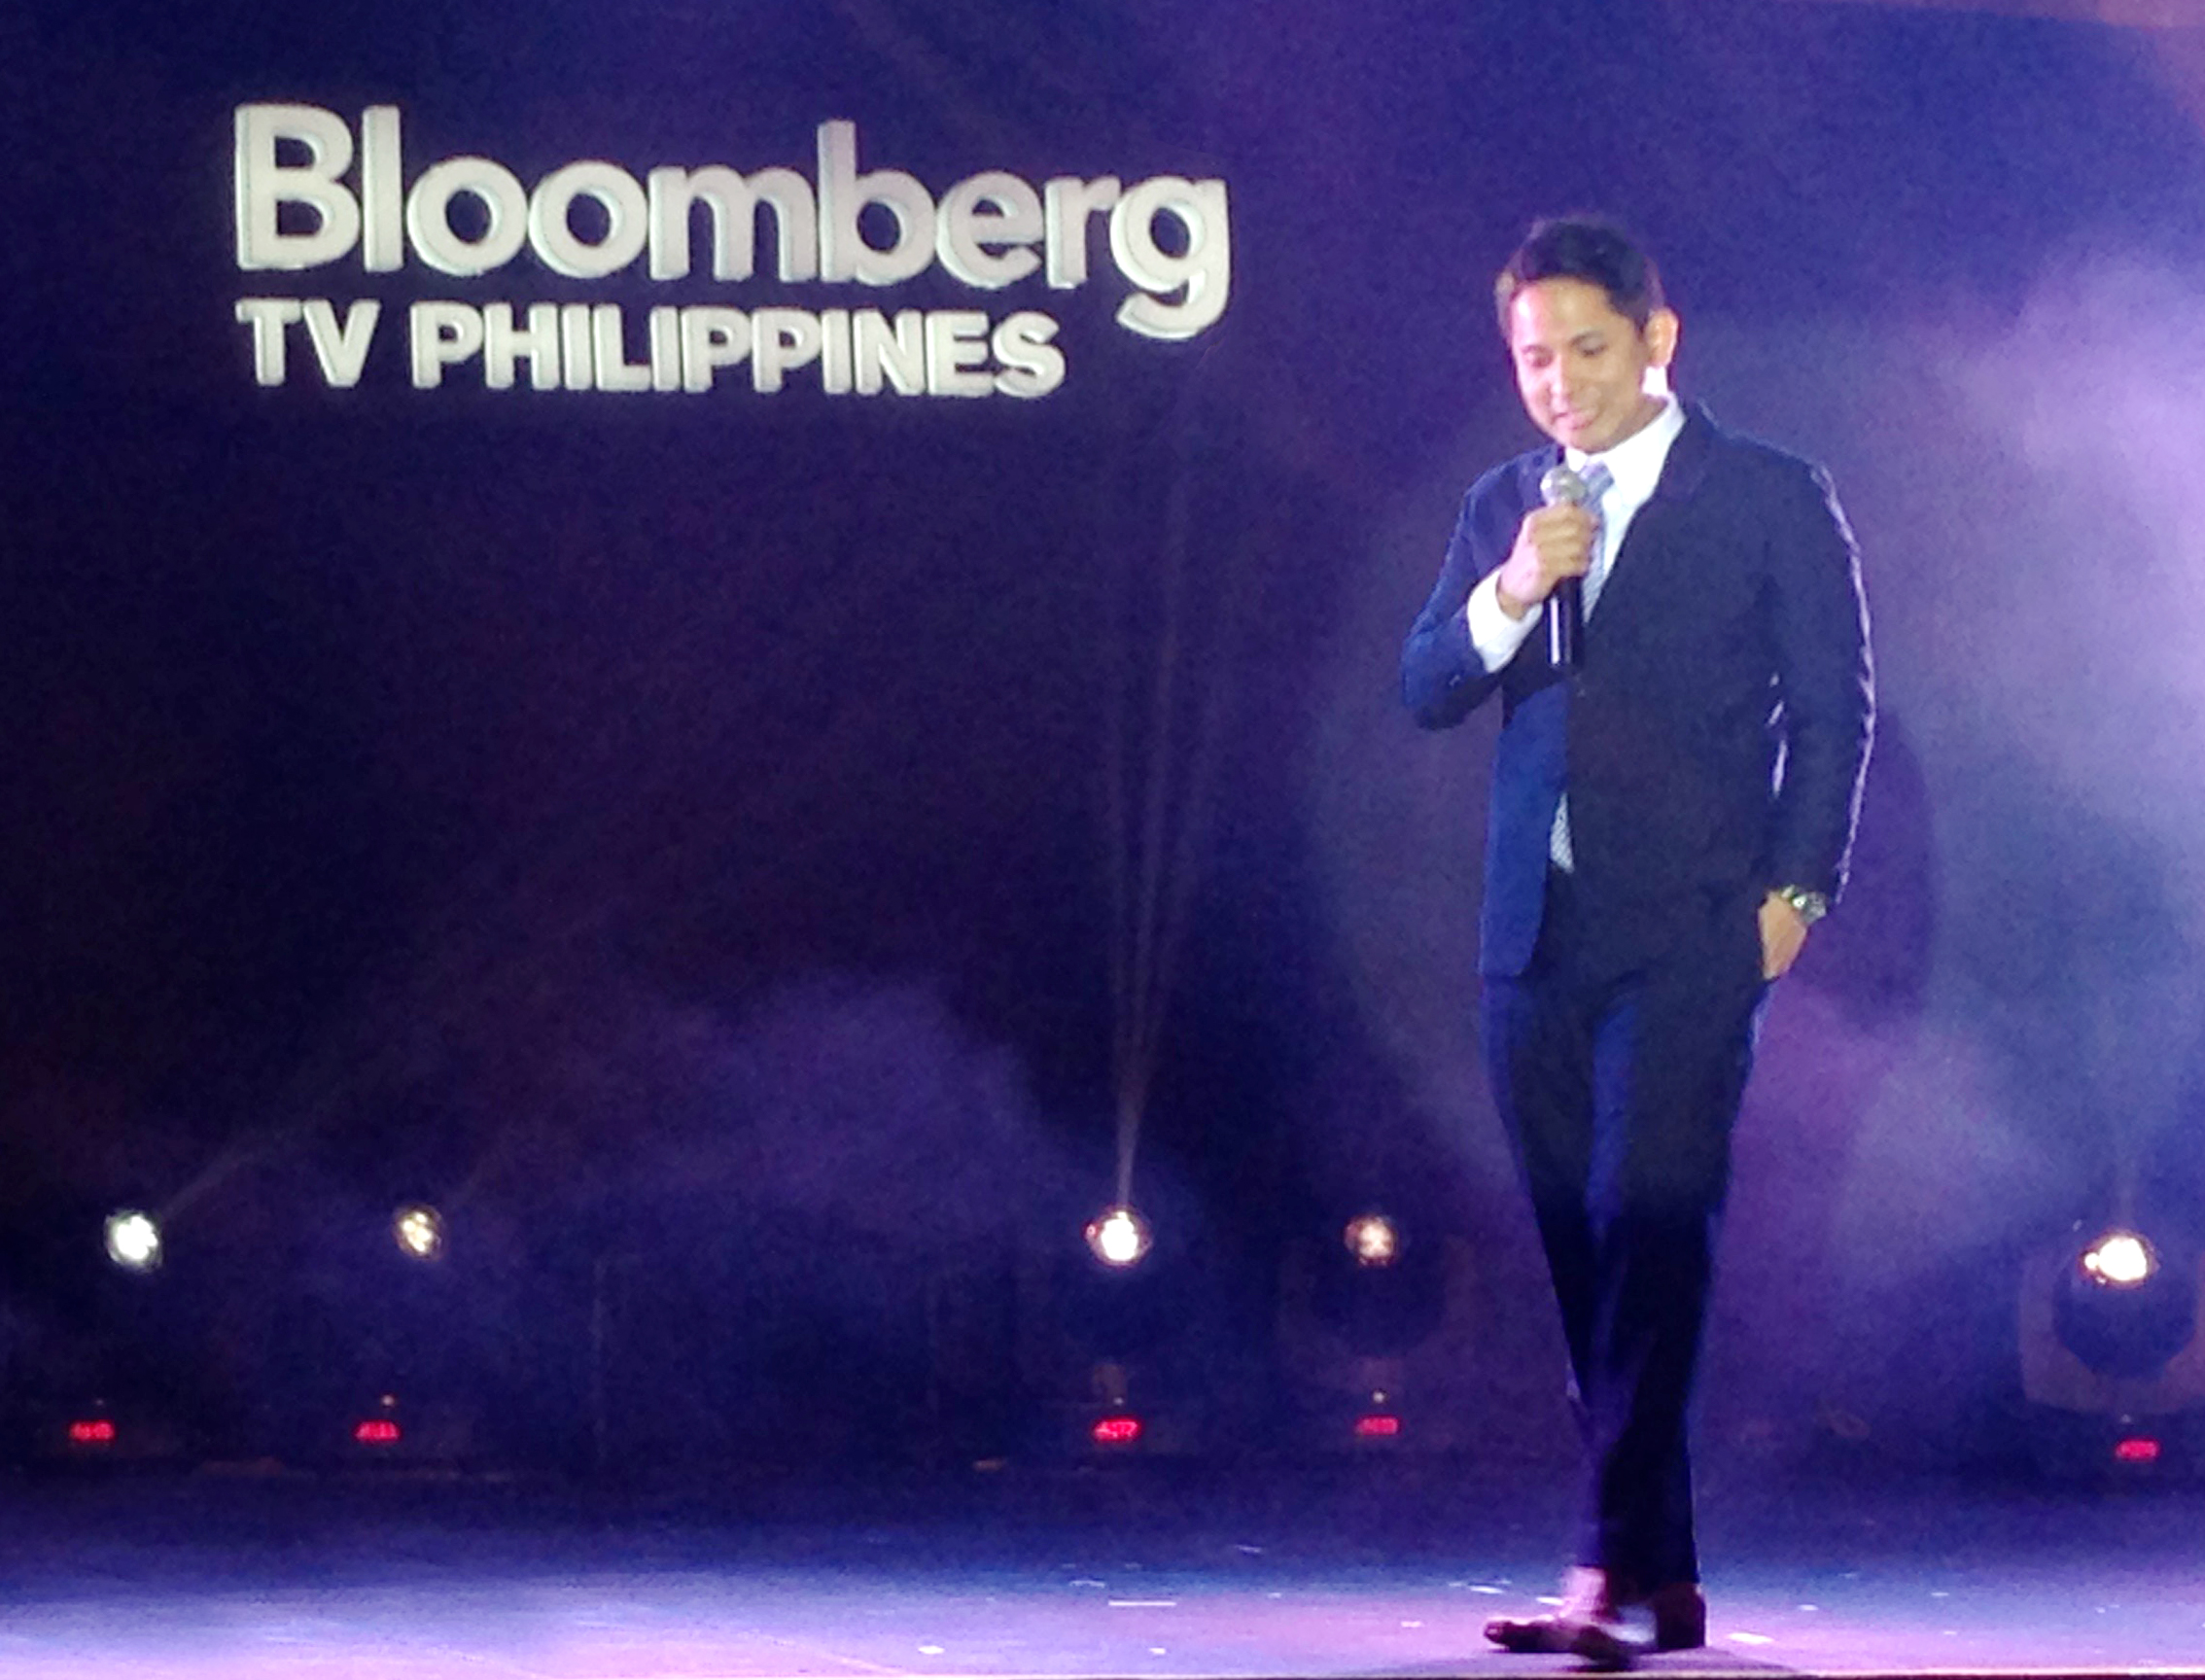 GOOD CHEMISTRY. Cignal COO Oscar Reyes Jr. says Bloomberg TV Philippines will be a world-class operation, as Cignal is the country's number one pay TV provider, while Bloomberg is a leading authority in business news. Photo by Chrisee Dela Paz/Rappler     